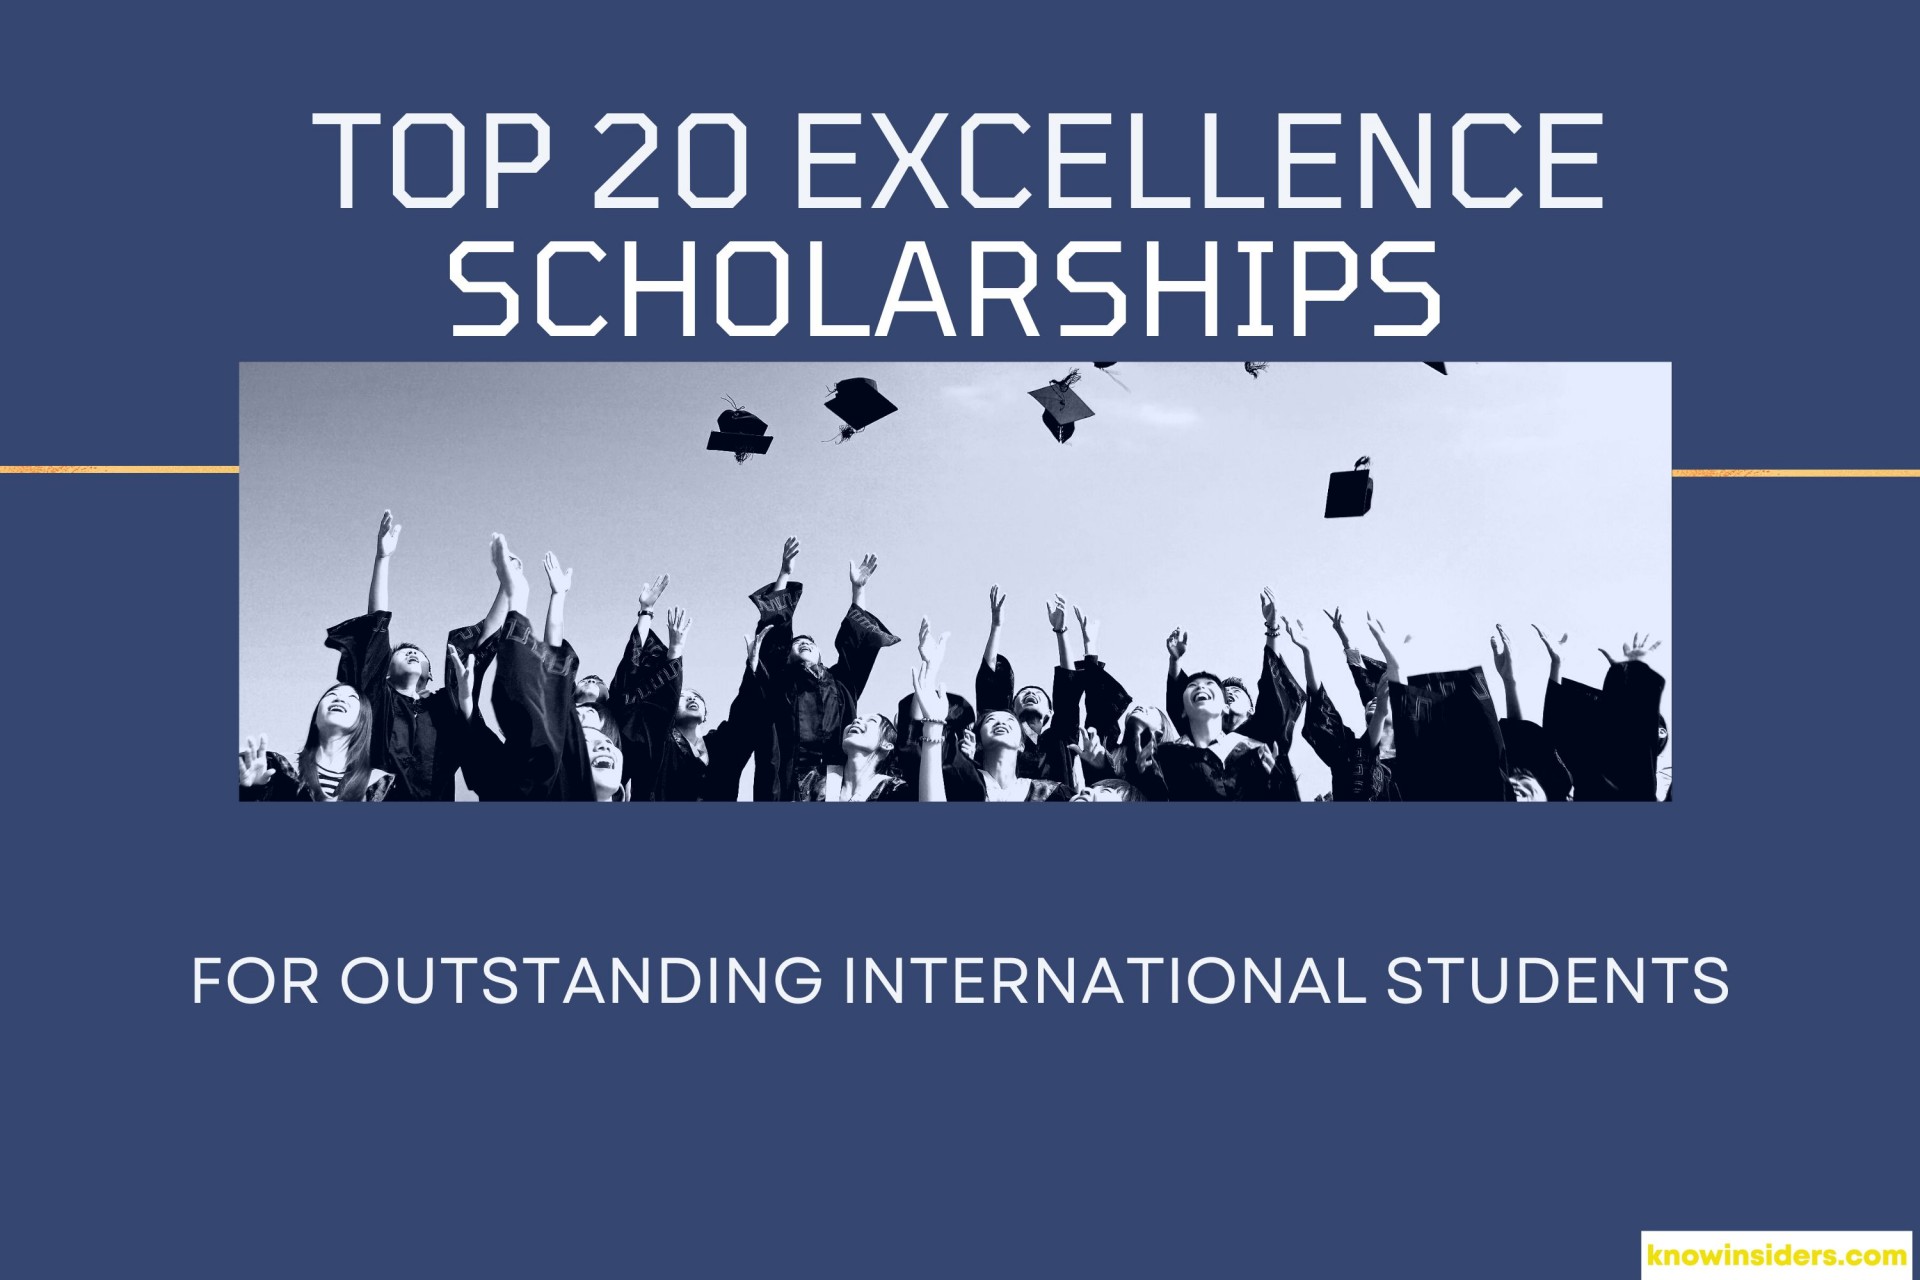 Top 20 Excellence Scholarships for Outstanding Students by Government and Universities